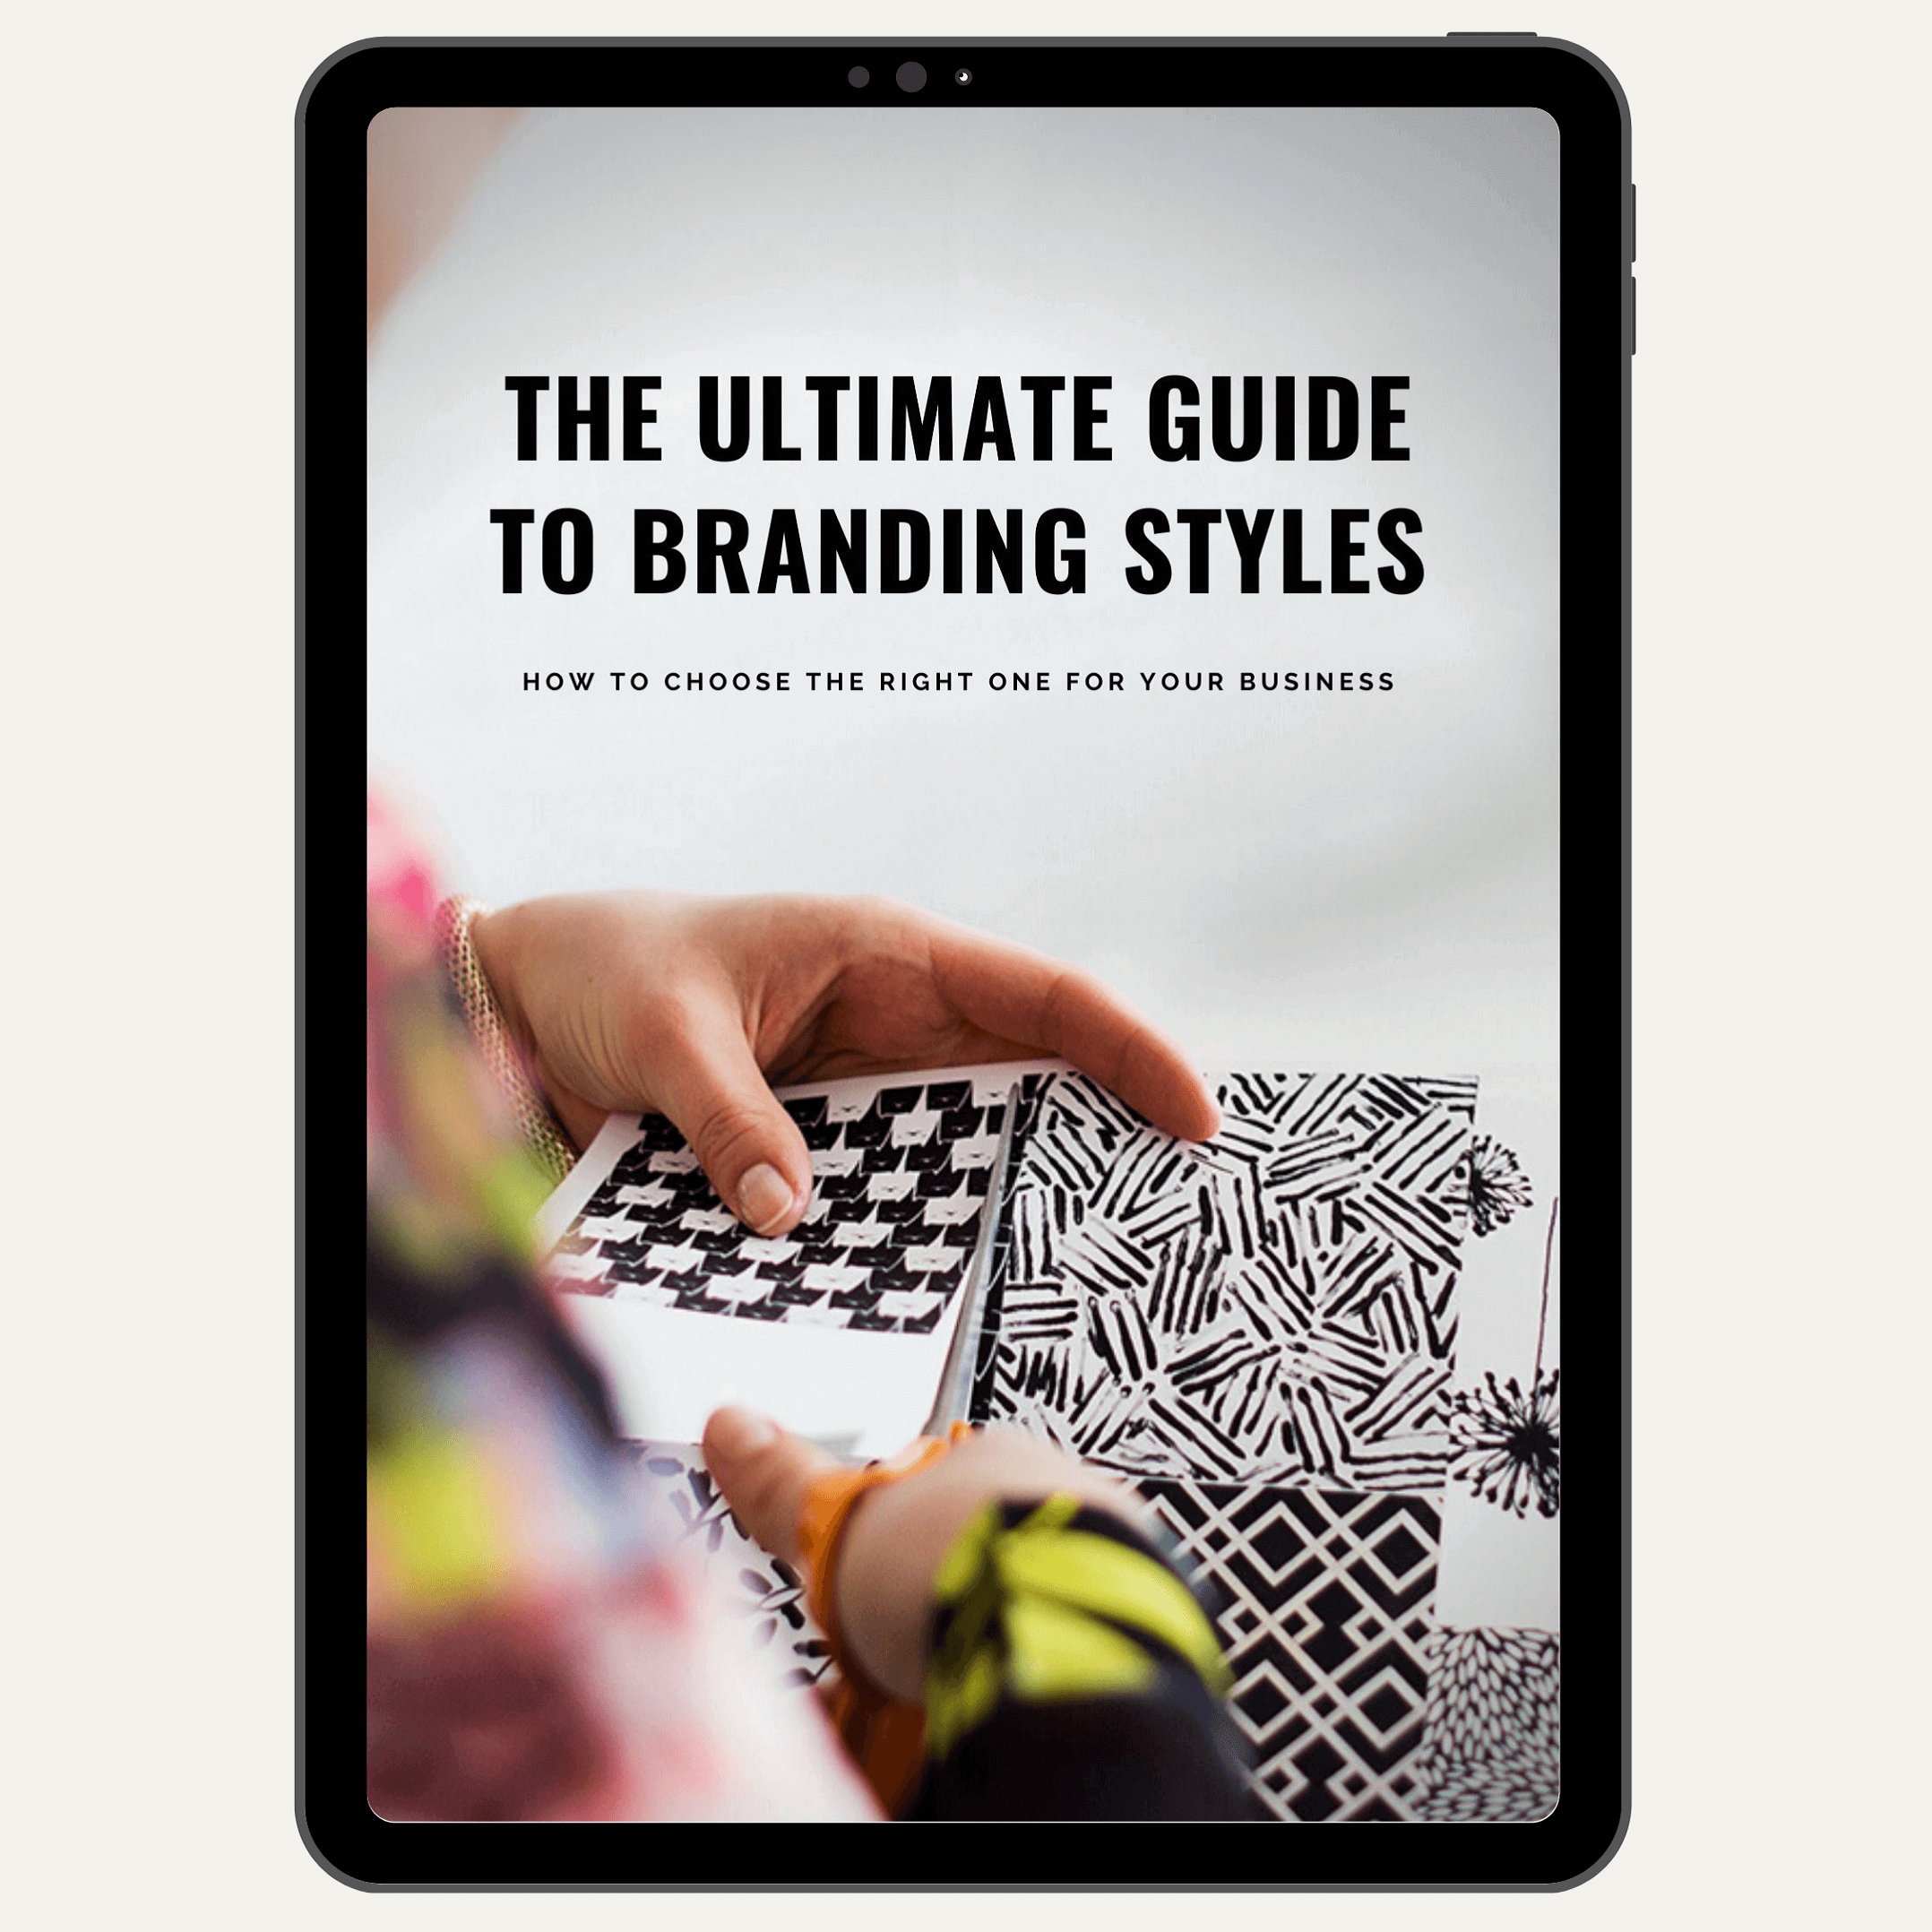 The Ultimate Guide To Branding Styles